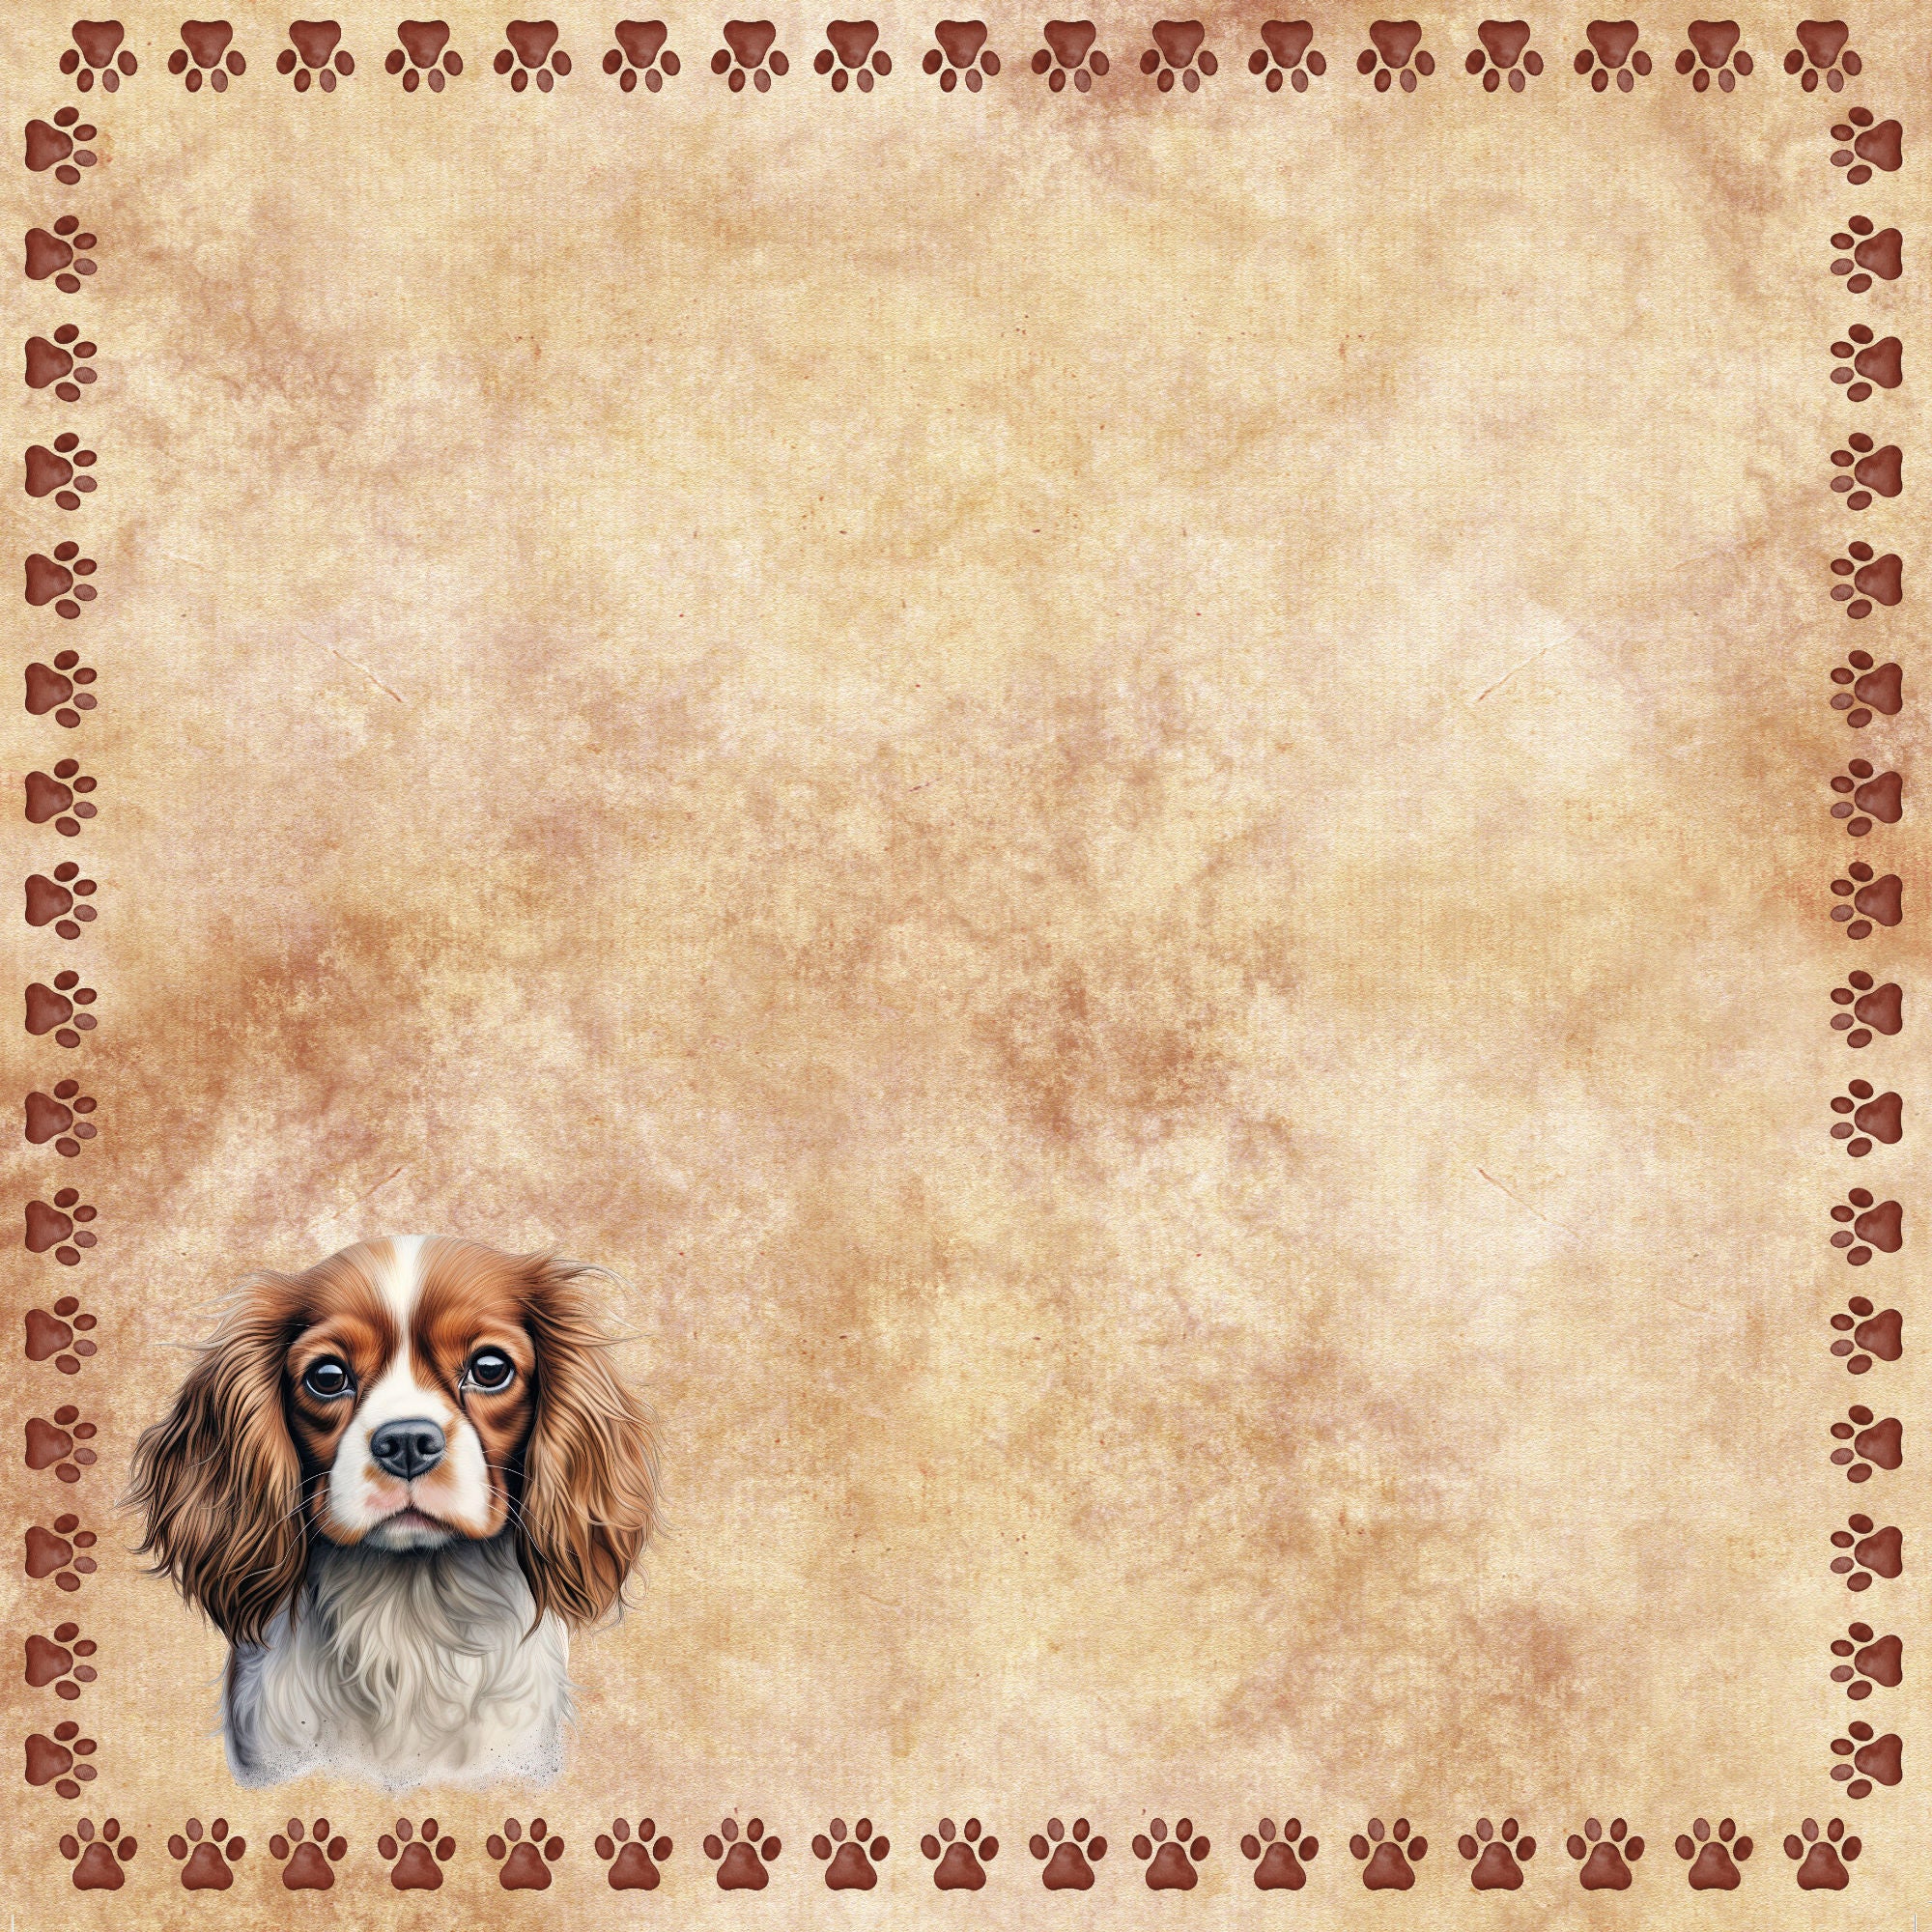 Dog Breeds Collection Cavalier King Charles Spaniel 12 x 12 Double-Sided Scrapbook Paper by SSC Designs